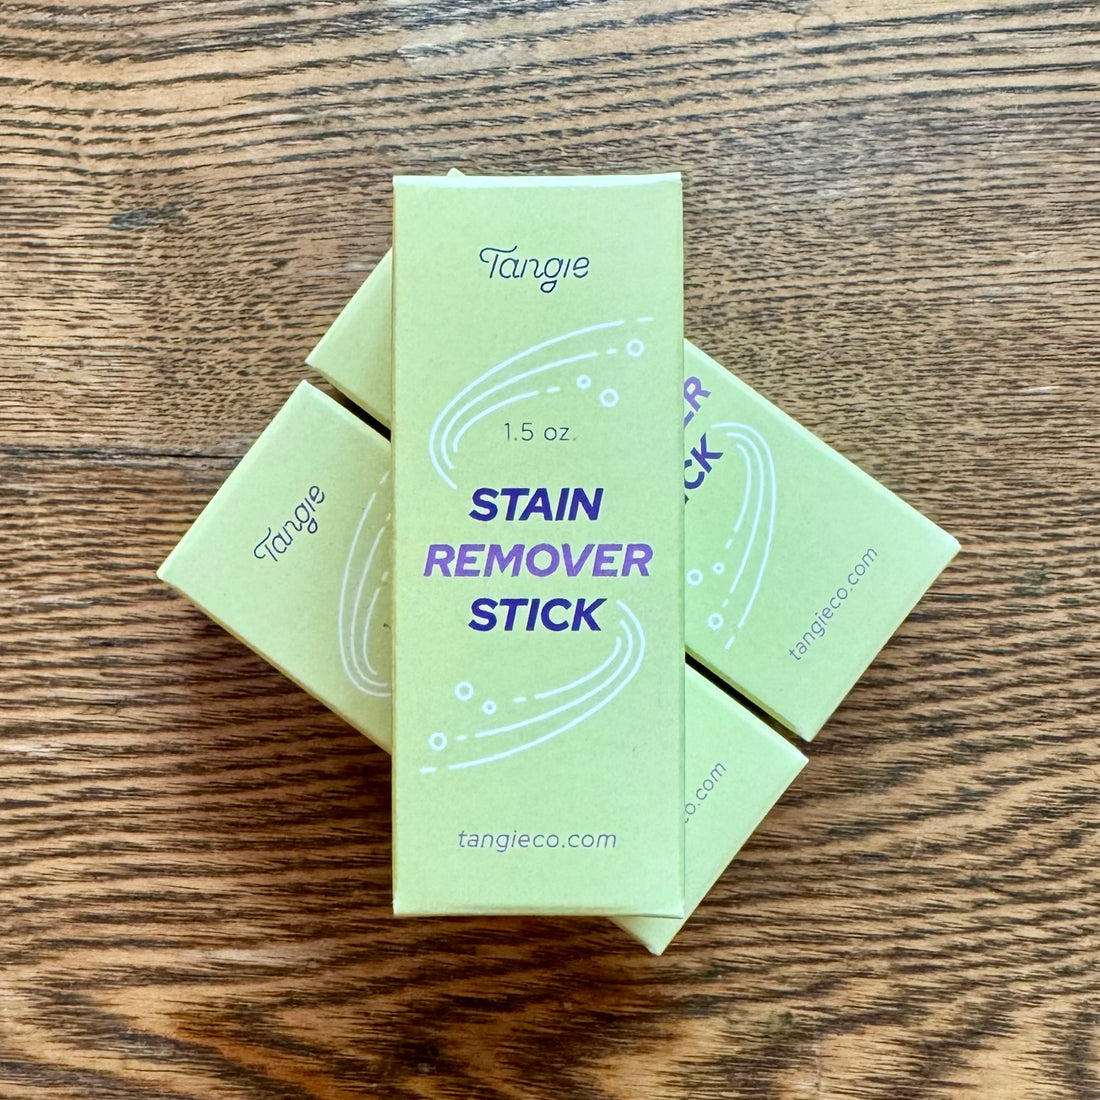 A rectangular yellowish box that says &quot;Stain Remover Stick&quot; in blue block letters, with the company name &quot;Tangie&quot; at the top, and the company website &quot;tangieco.com&quot; at the bottom. 